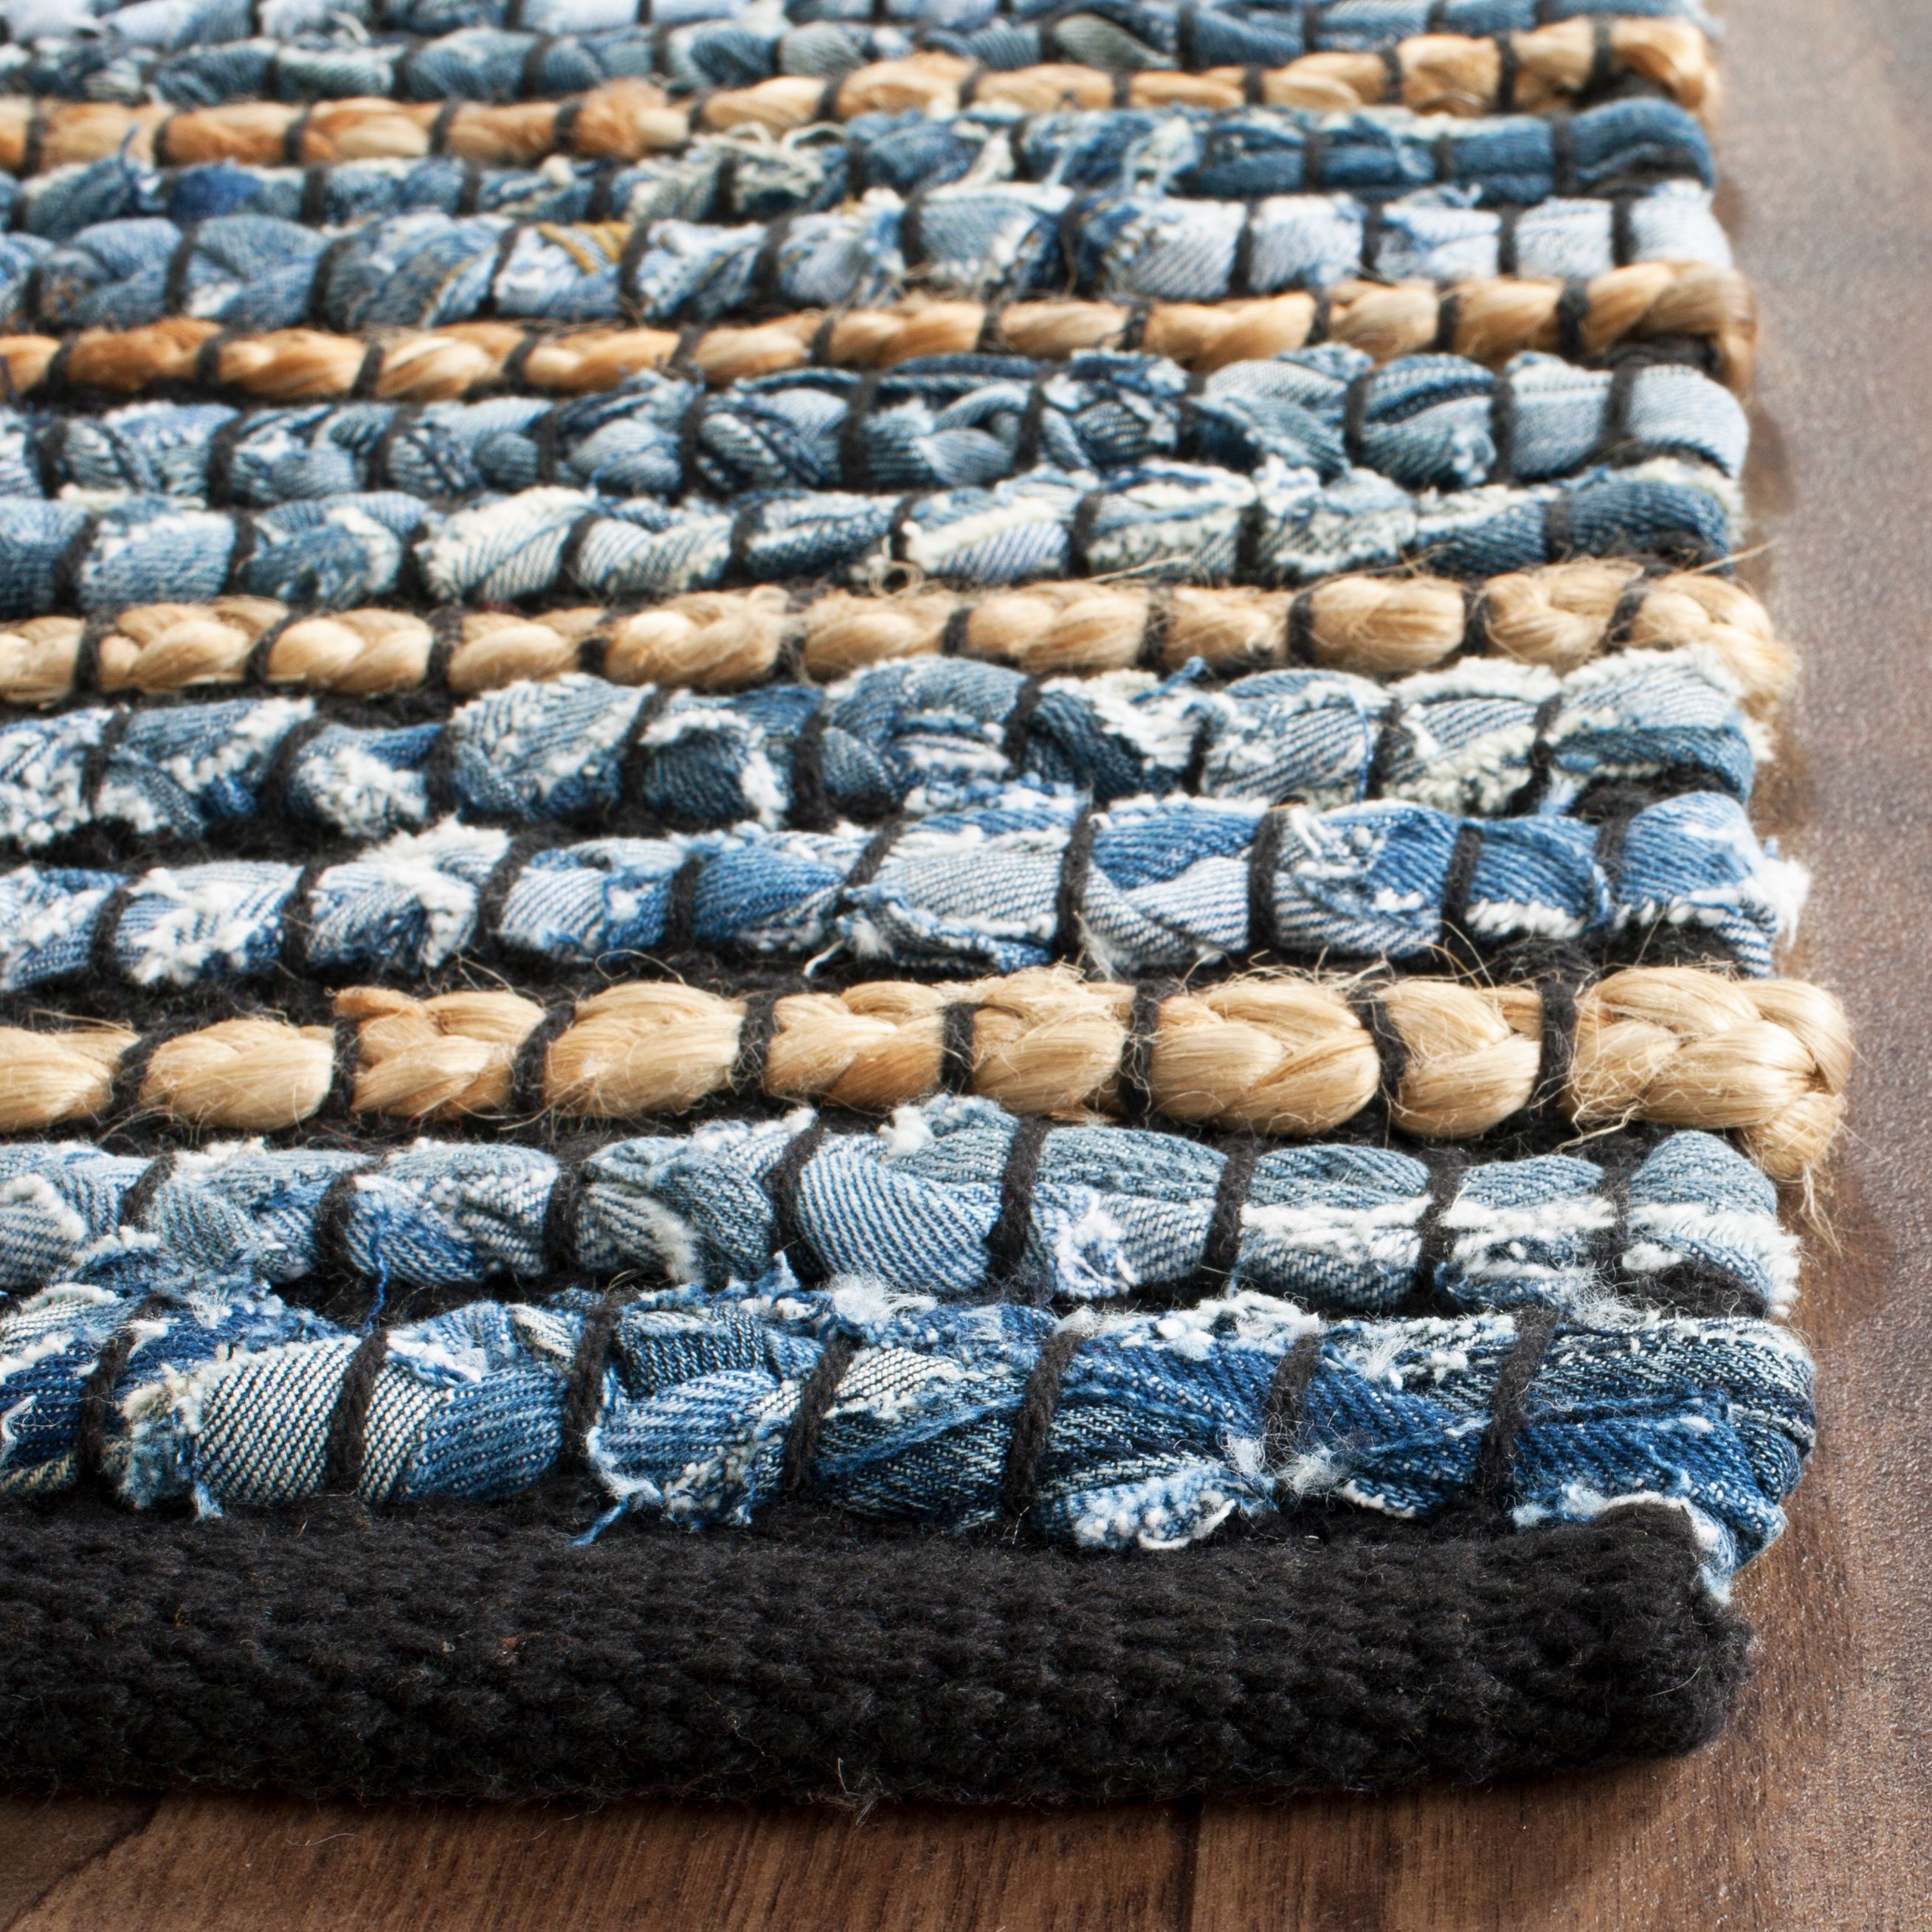 SAFAVIEH Cape Cod Signe Braided Striped Area Rug, 2'3" x 6', Blue/Natural - image 3 of 6